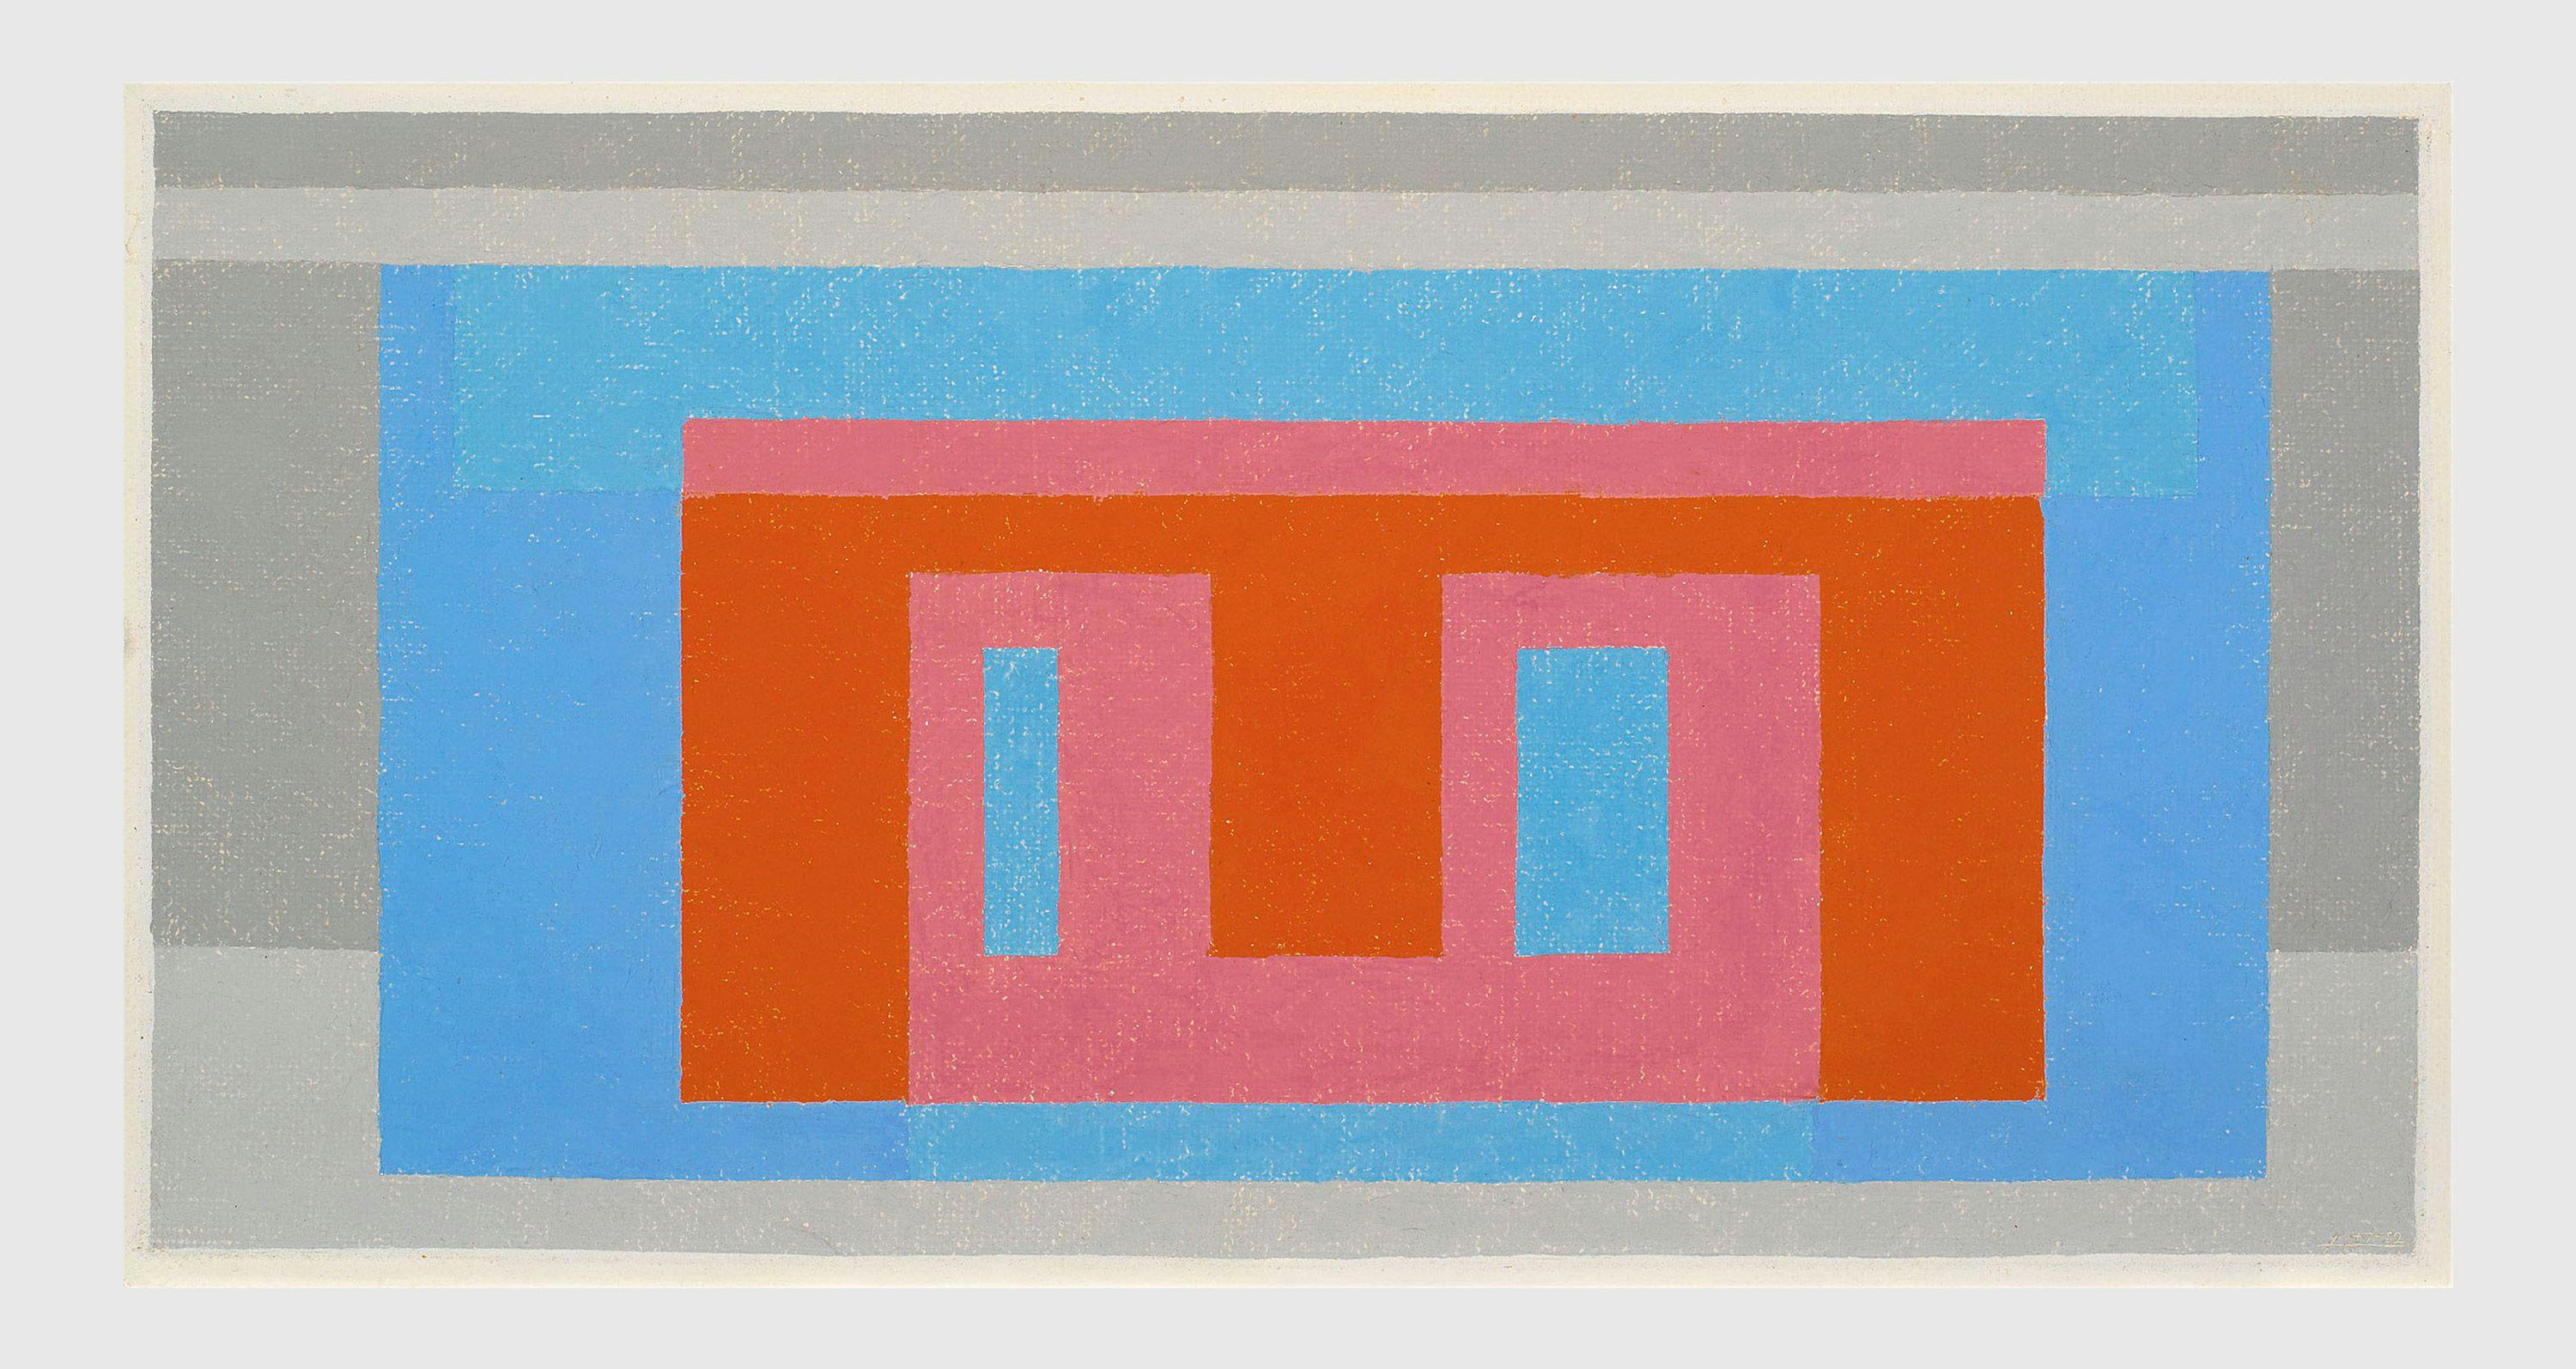 A painting by Josef Albers, titled Luminous Day, 1947 to 1952.